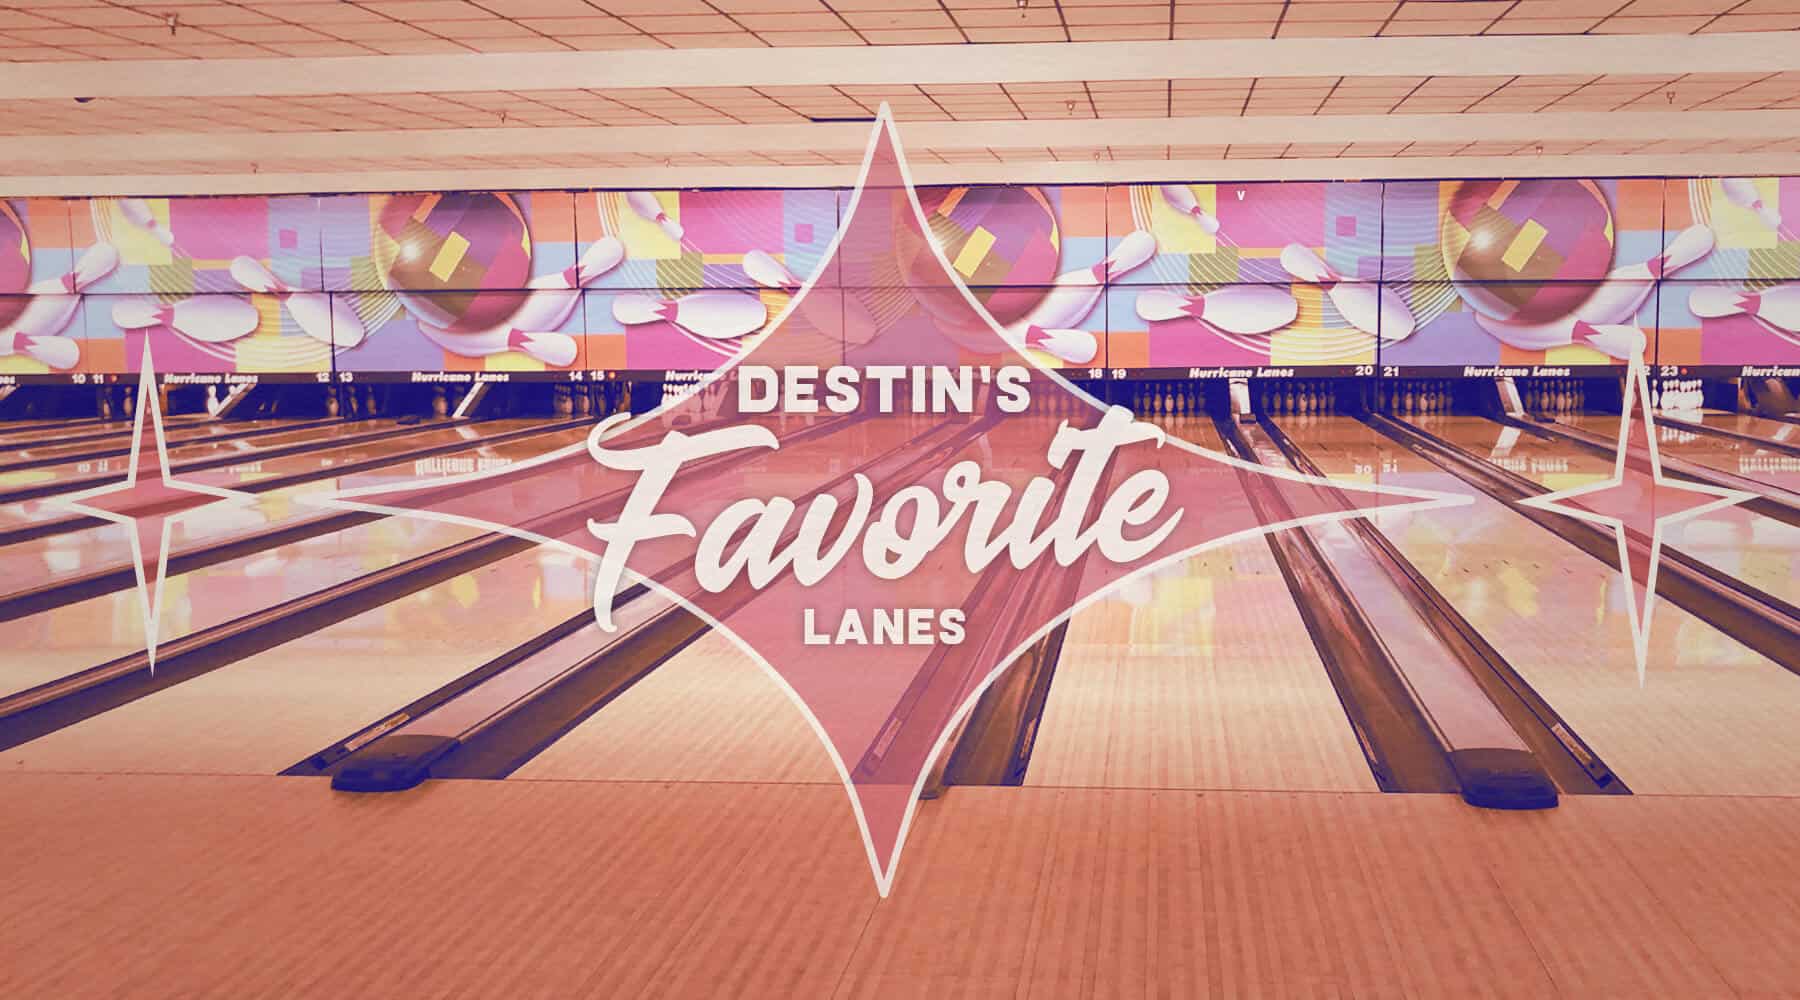 A shot of Hurricane Lanes with the words Destin's Favorite Lanes